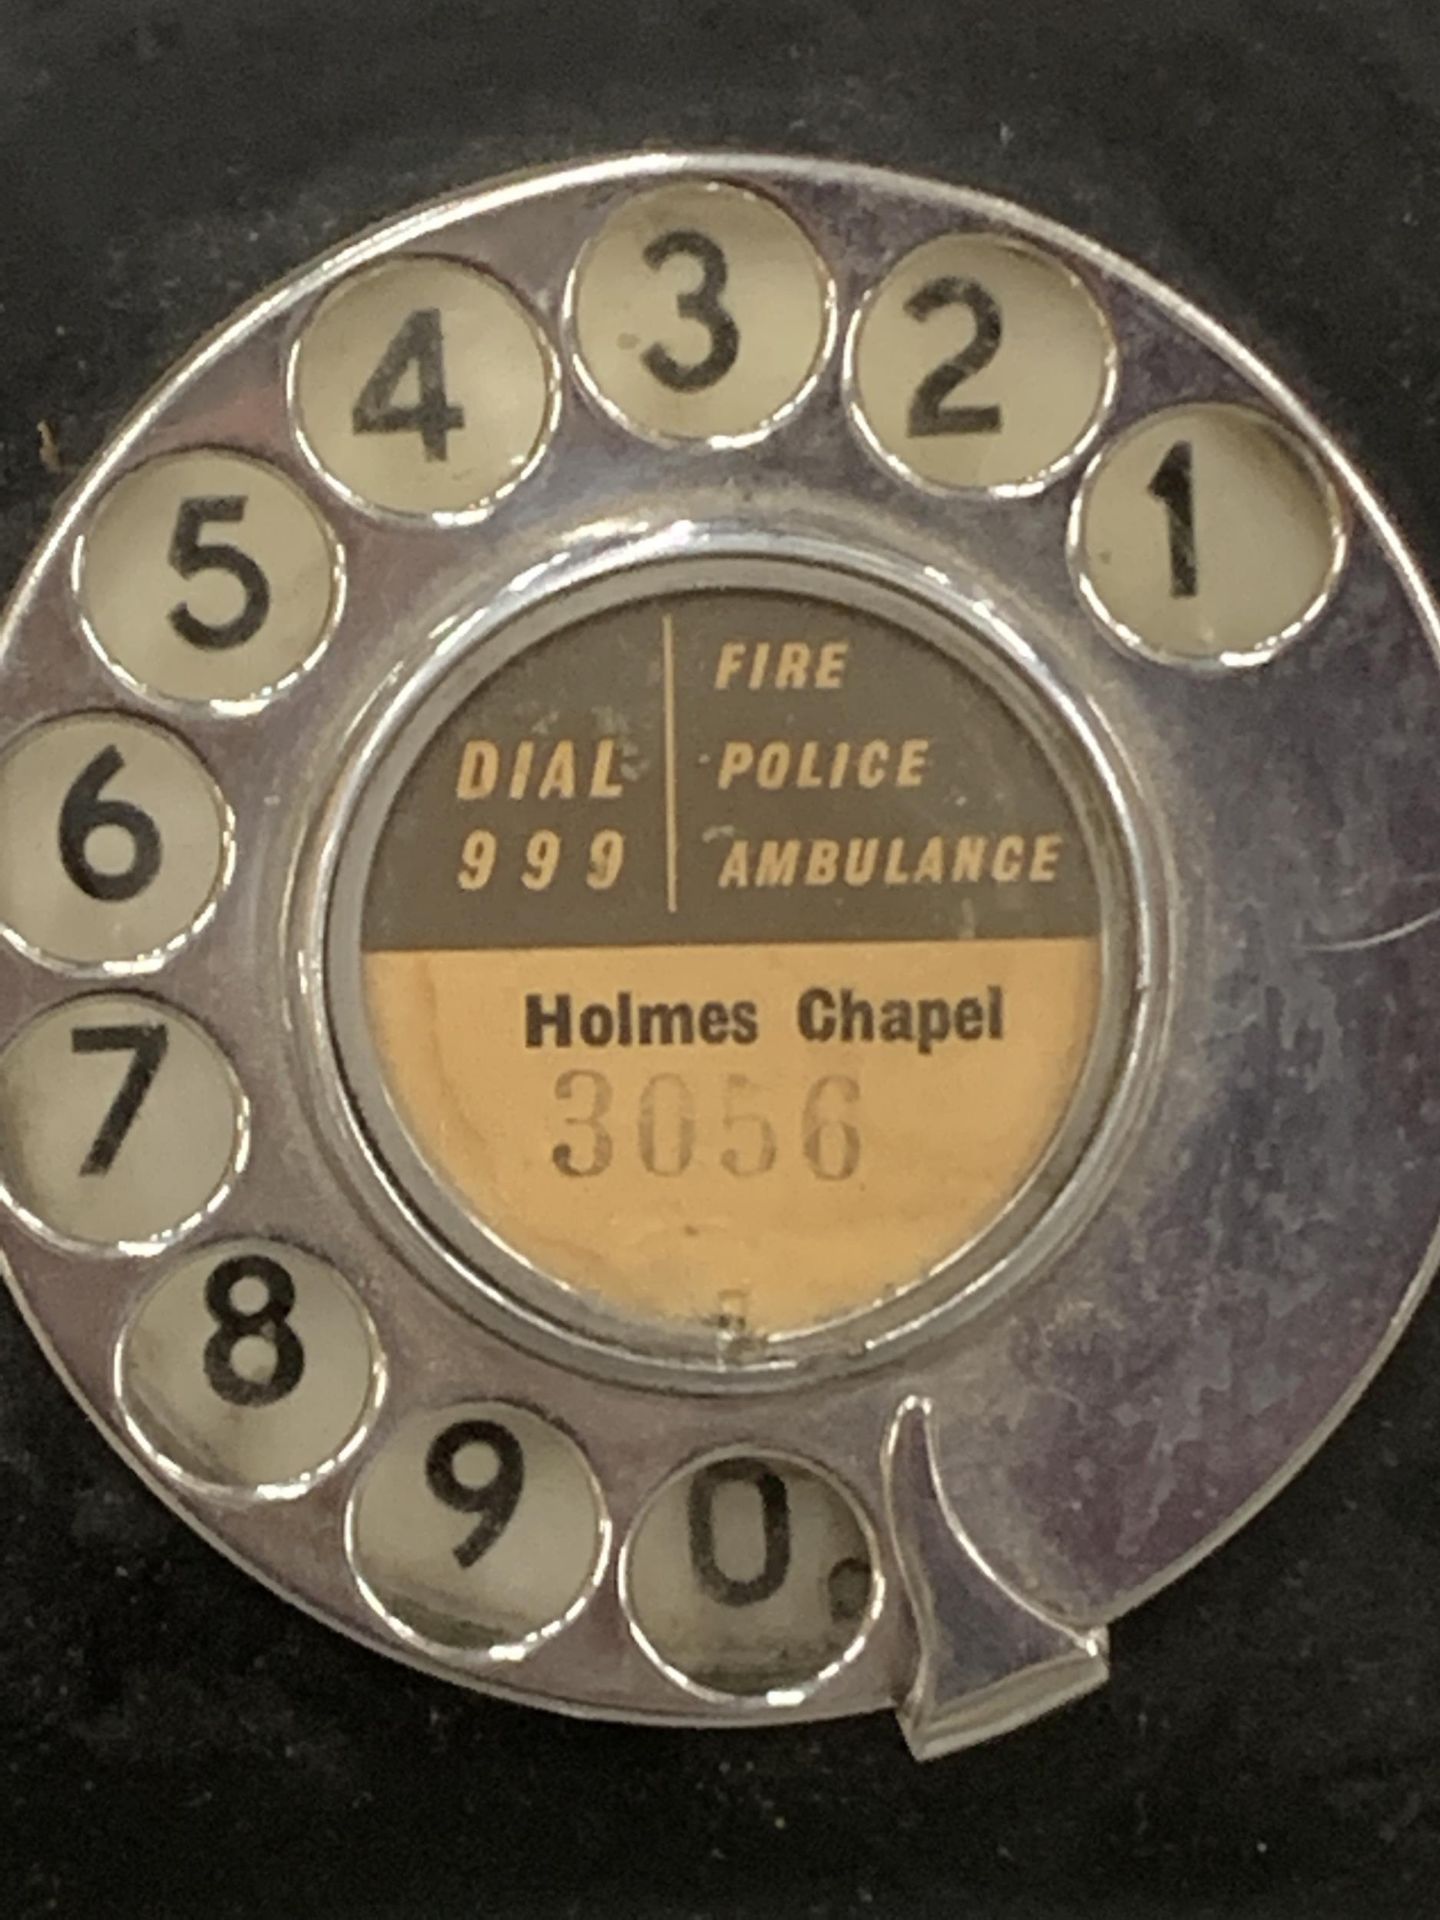 A VINTAGE BAKELITE TELEPHONE WITH PULL OUT TRAY AND HOLMES CHAPEL NUMBER - Image 2 of 3